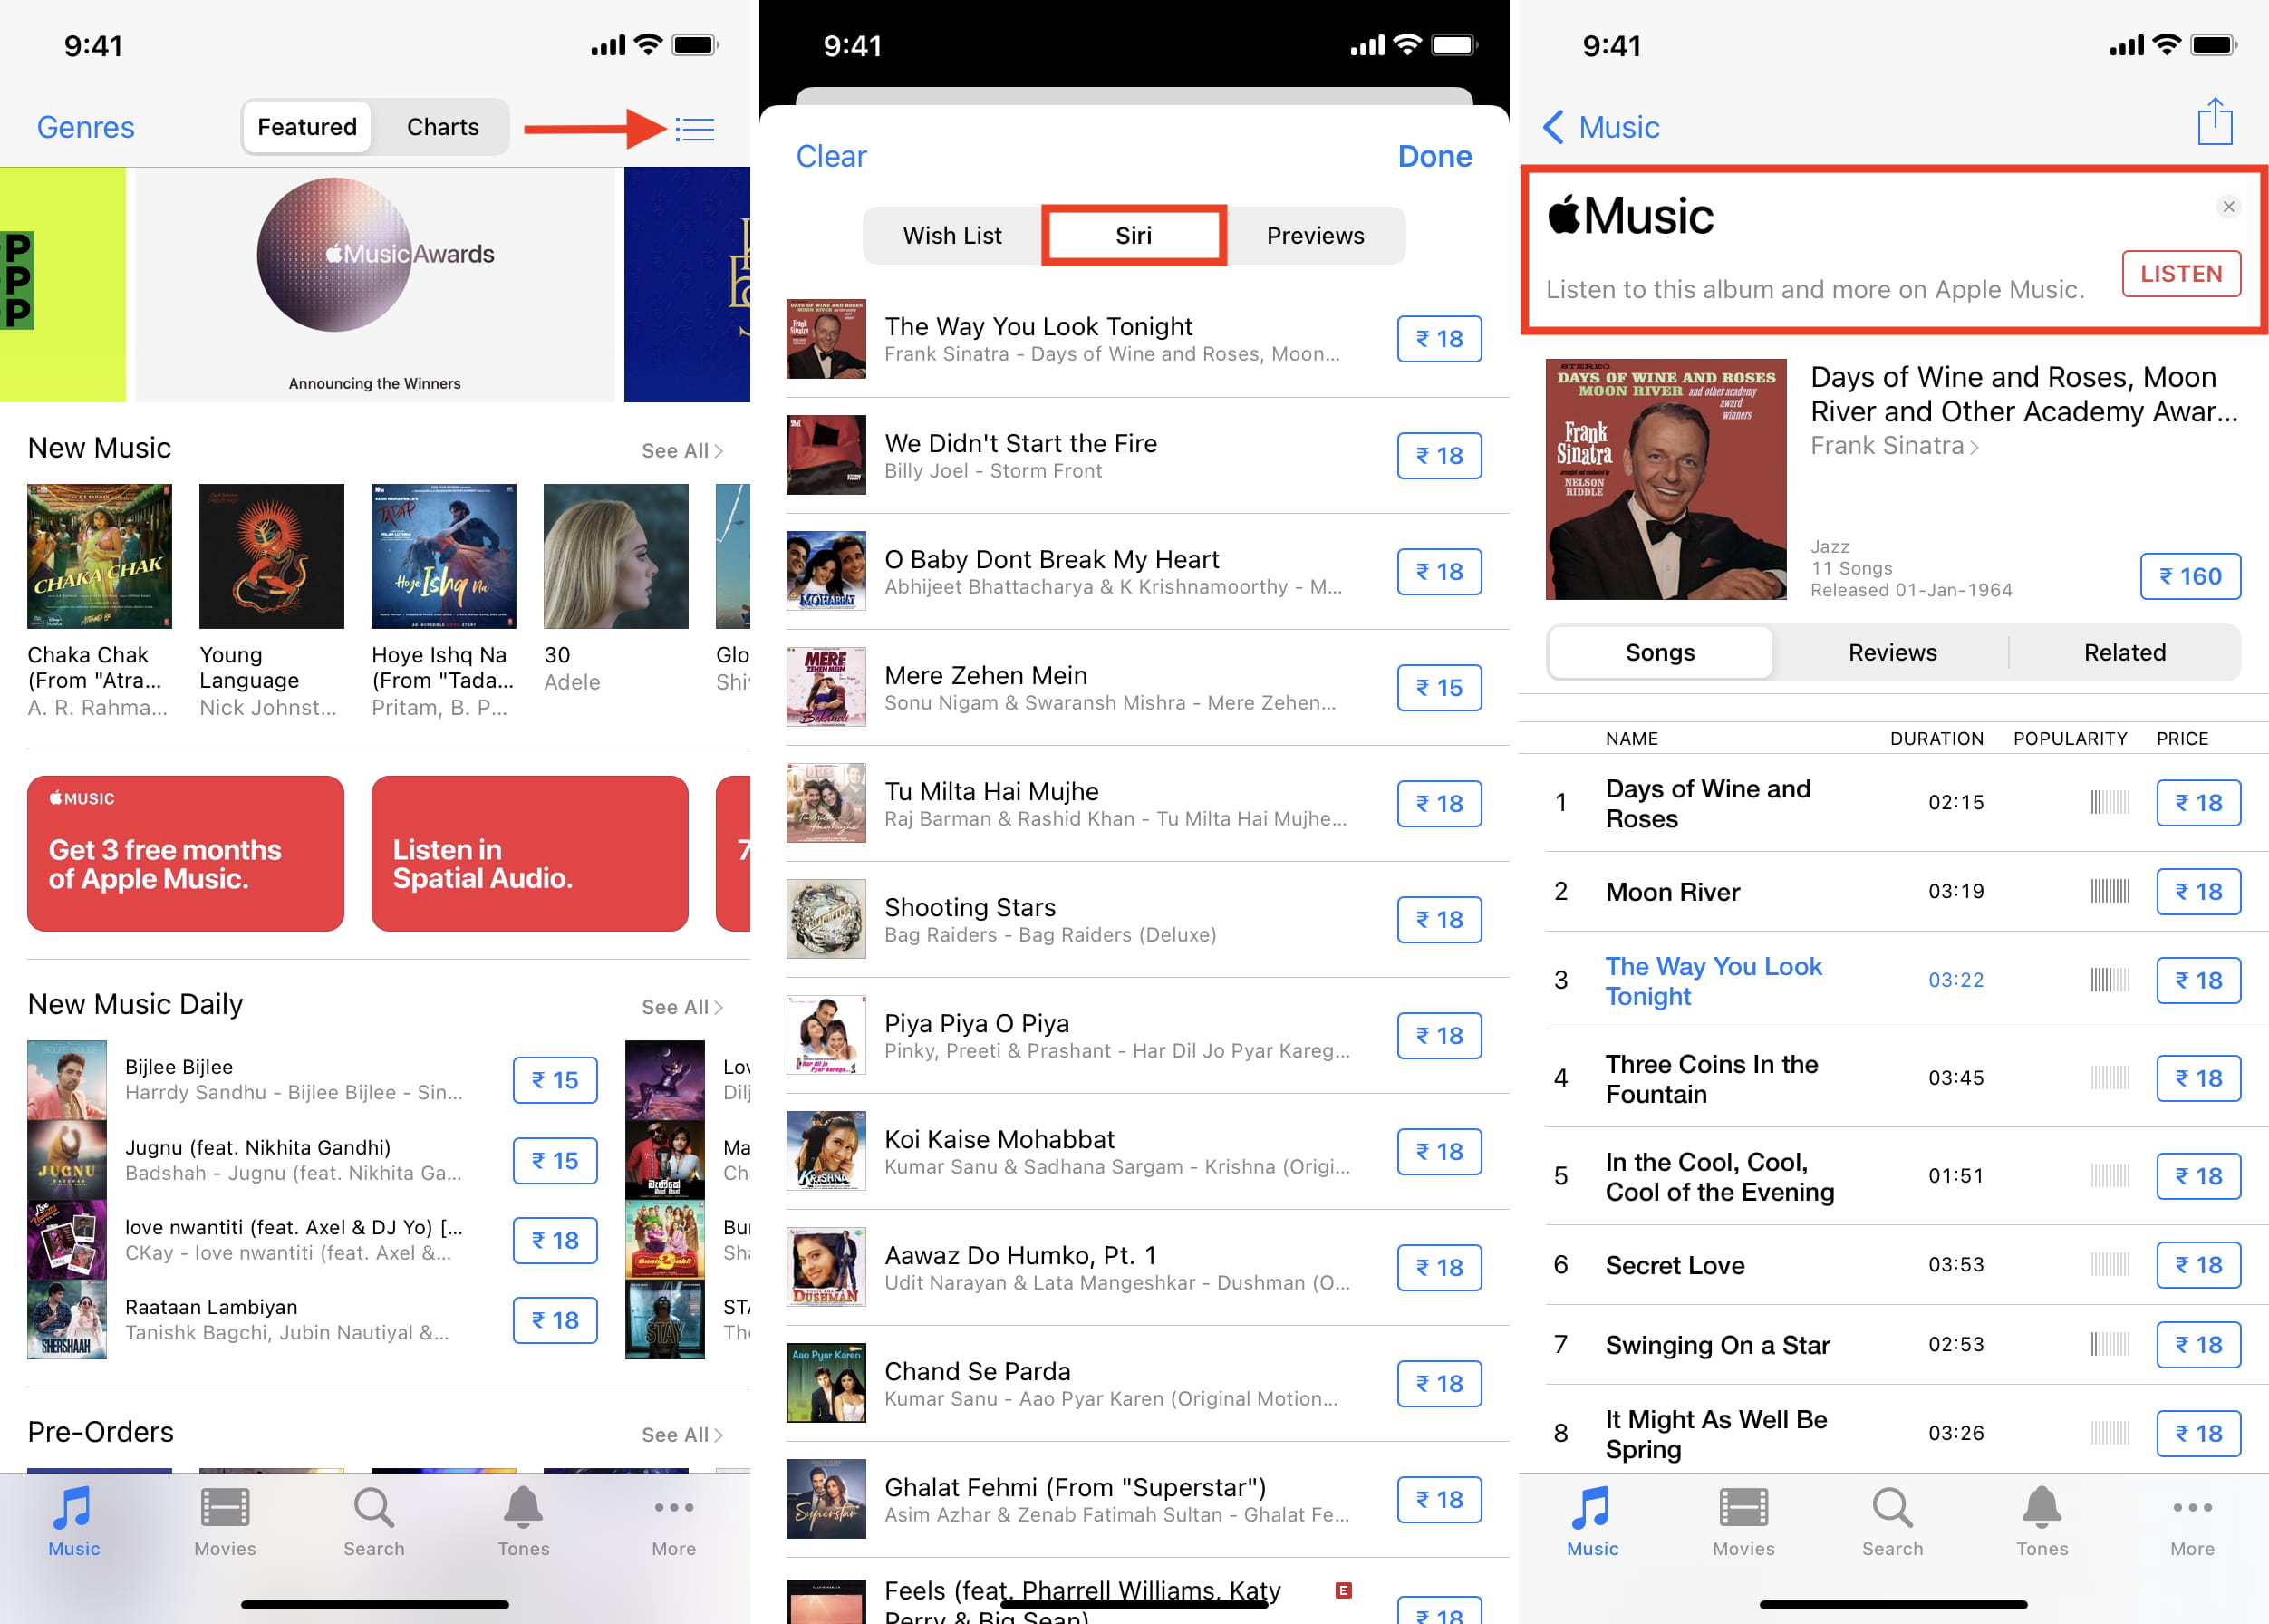 Siri Shazam song history in iPhone iTunes Store app